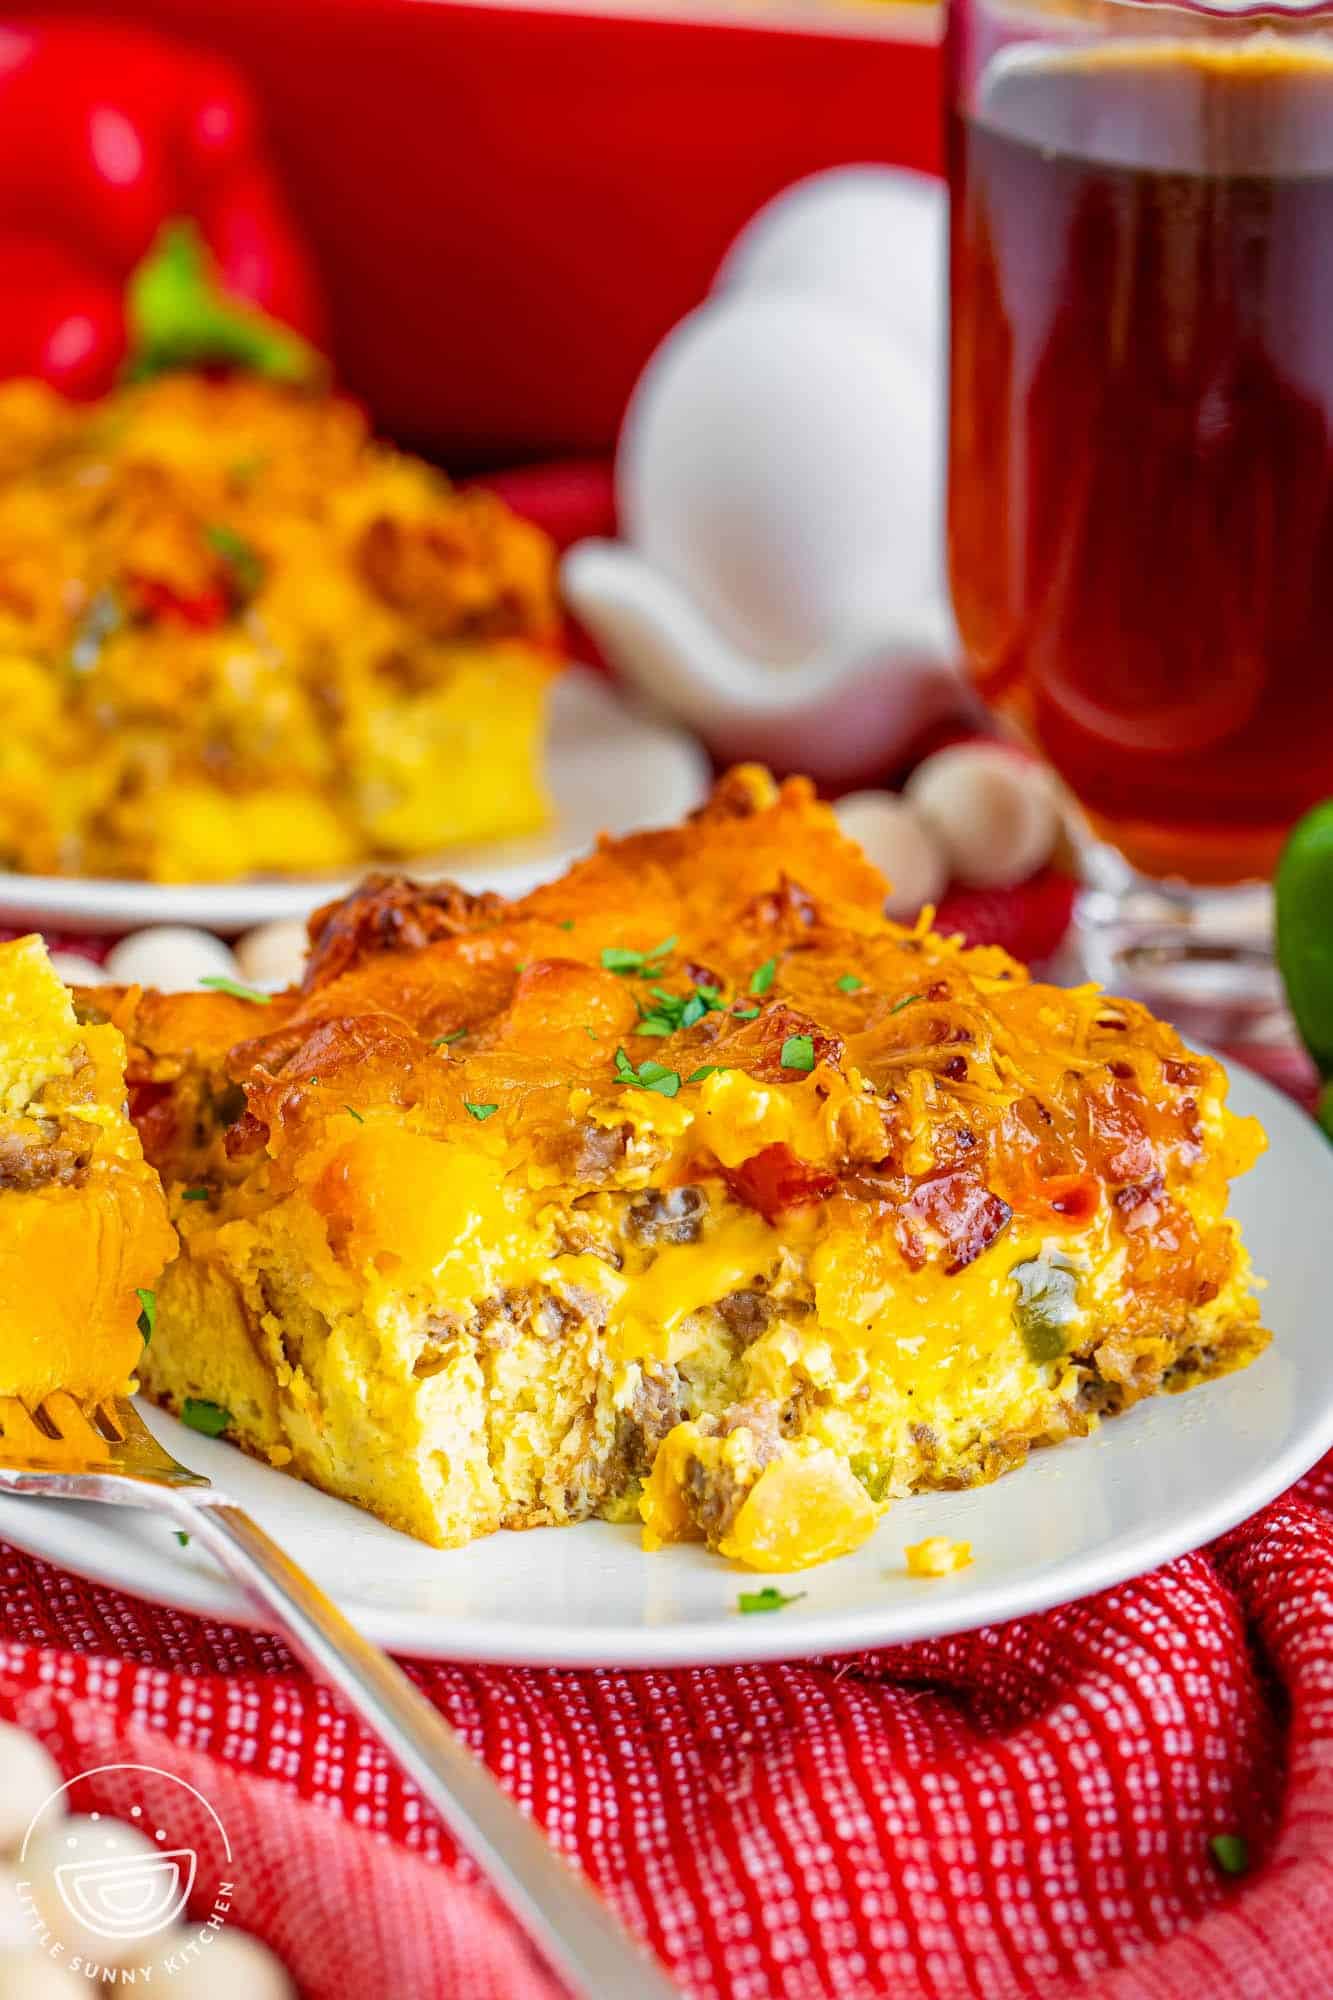 a piece of breakfast casserole and a mug of tea. a fork has taken a bite of the meal.